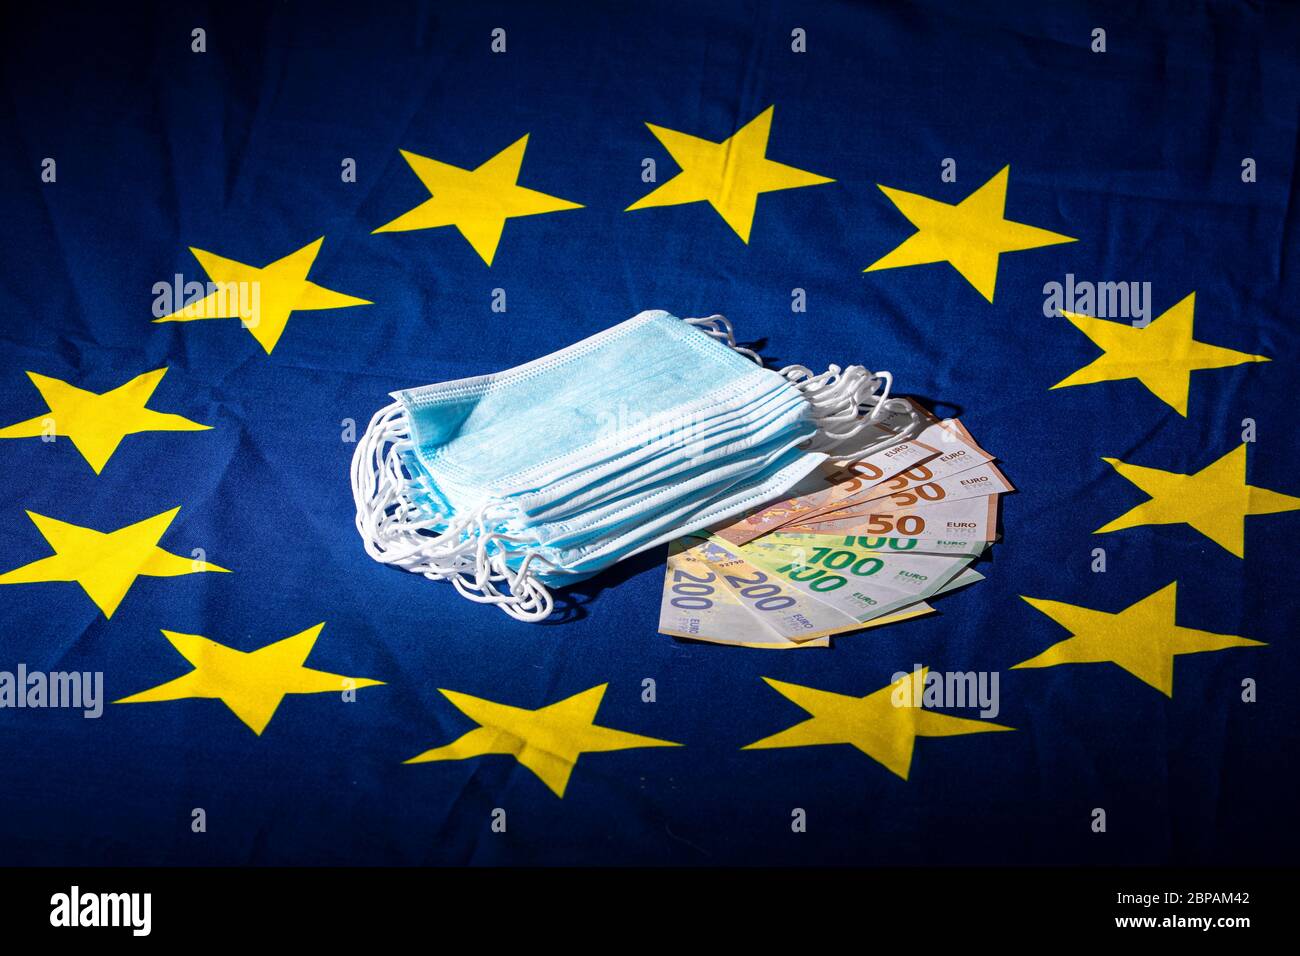 Illustration of anti pandemic material on a european flag, illustrating the business made with some panic buying Stock Photo